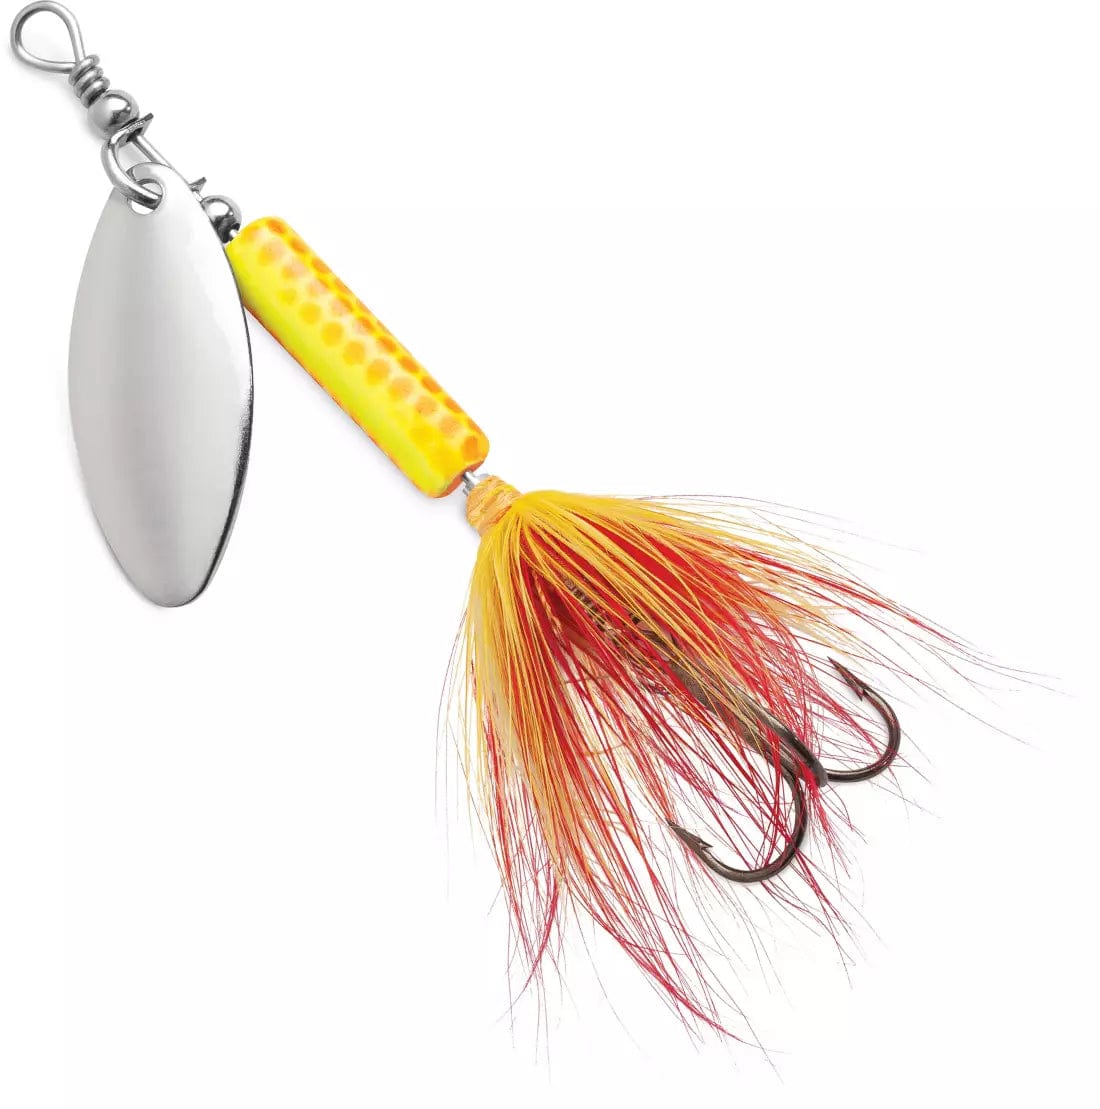 Baits Blue Fox Whip Tail Deep Runner Inline Spinnerbait 1/4oz. Orange Chartreuse Blue Fox Whip Tail Inline Spinnerbait | Pescador Fishing Supply